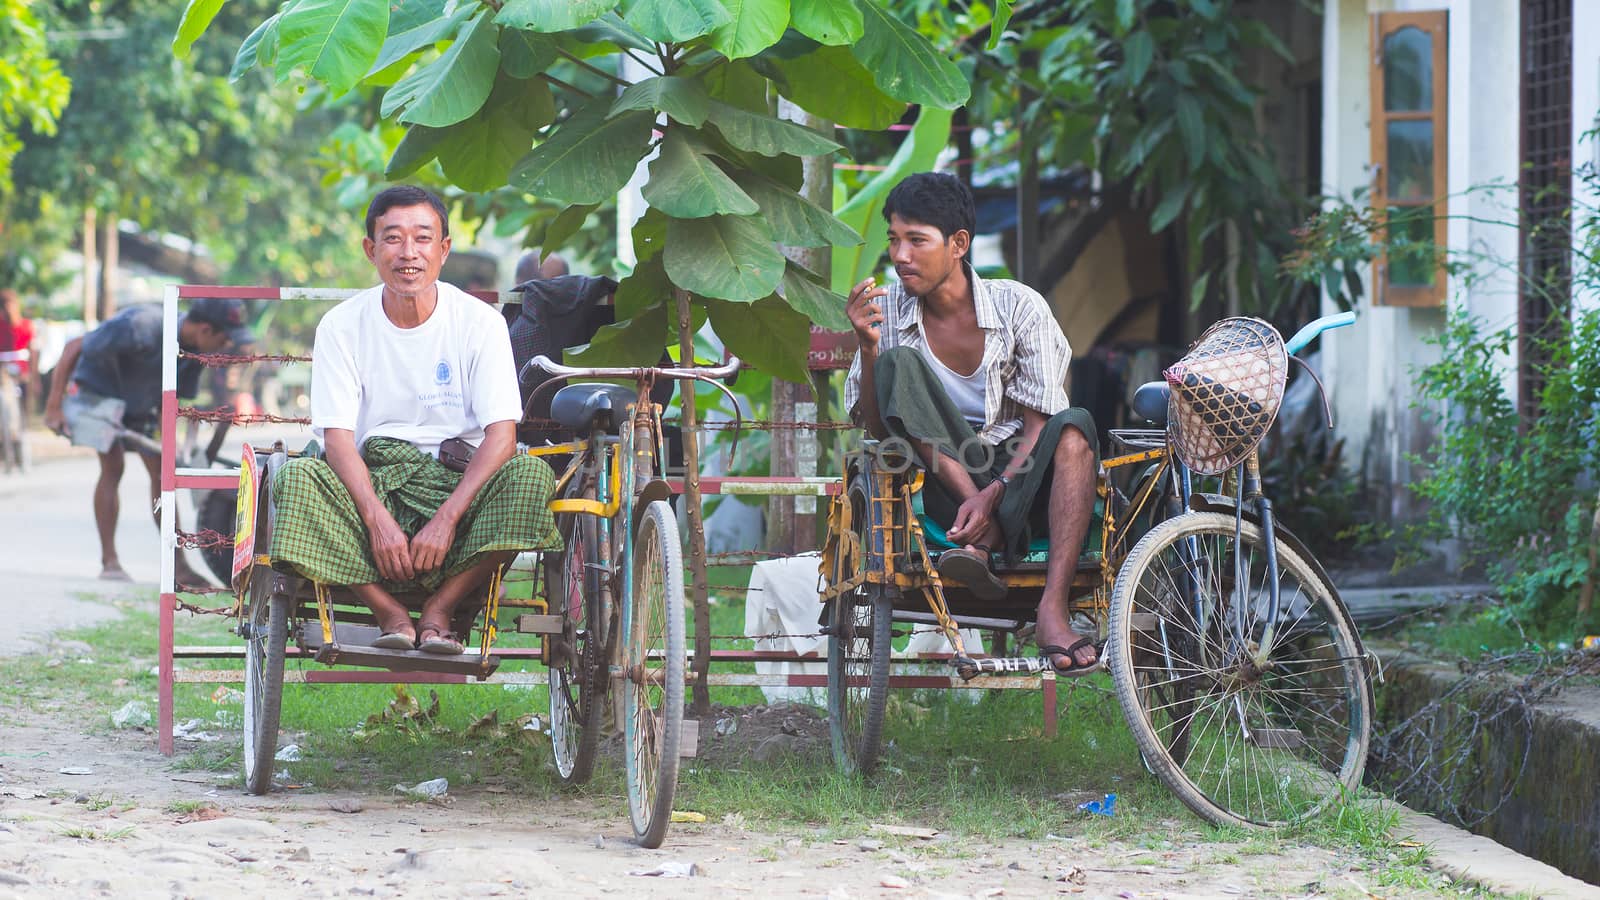 Sittwe, Rakhine State, Myanmar - October 15, 2014: Two bicycle taxis waiting for passengers in Sittwe, the capital of the Rakhine State in Myanmar.